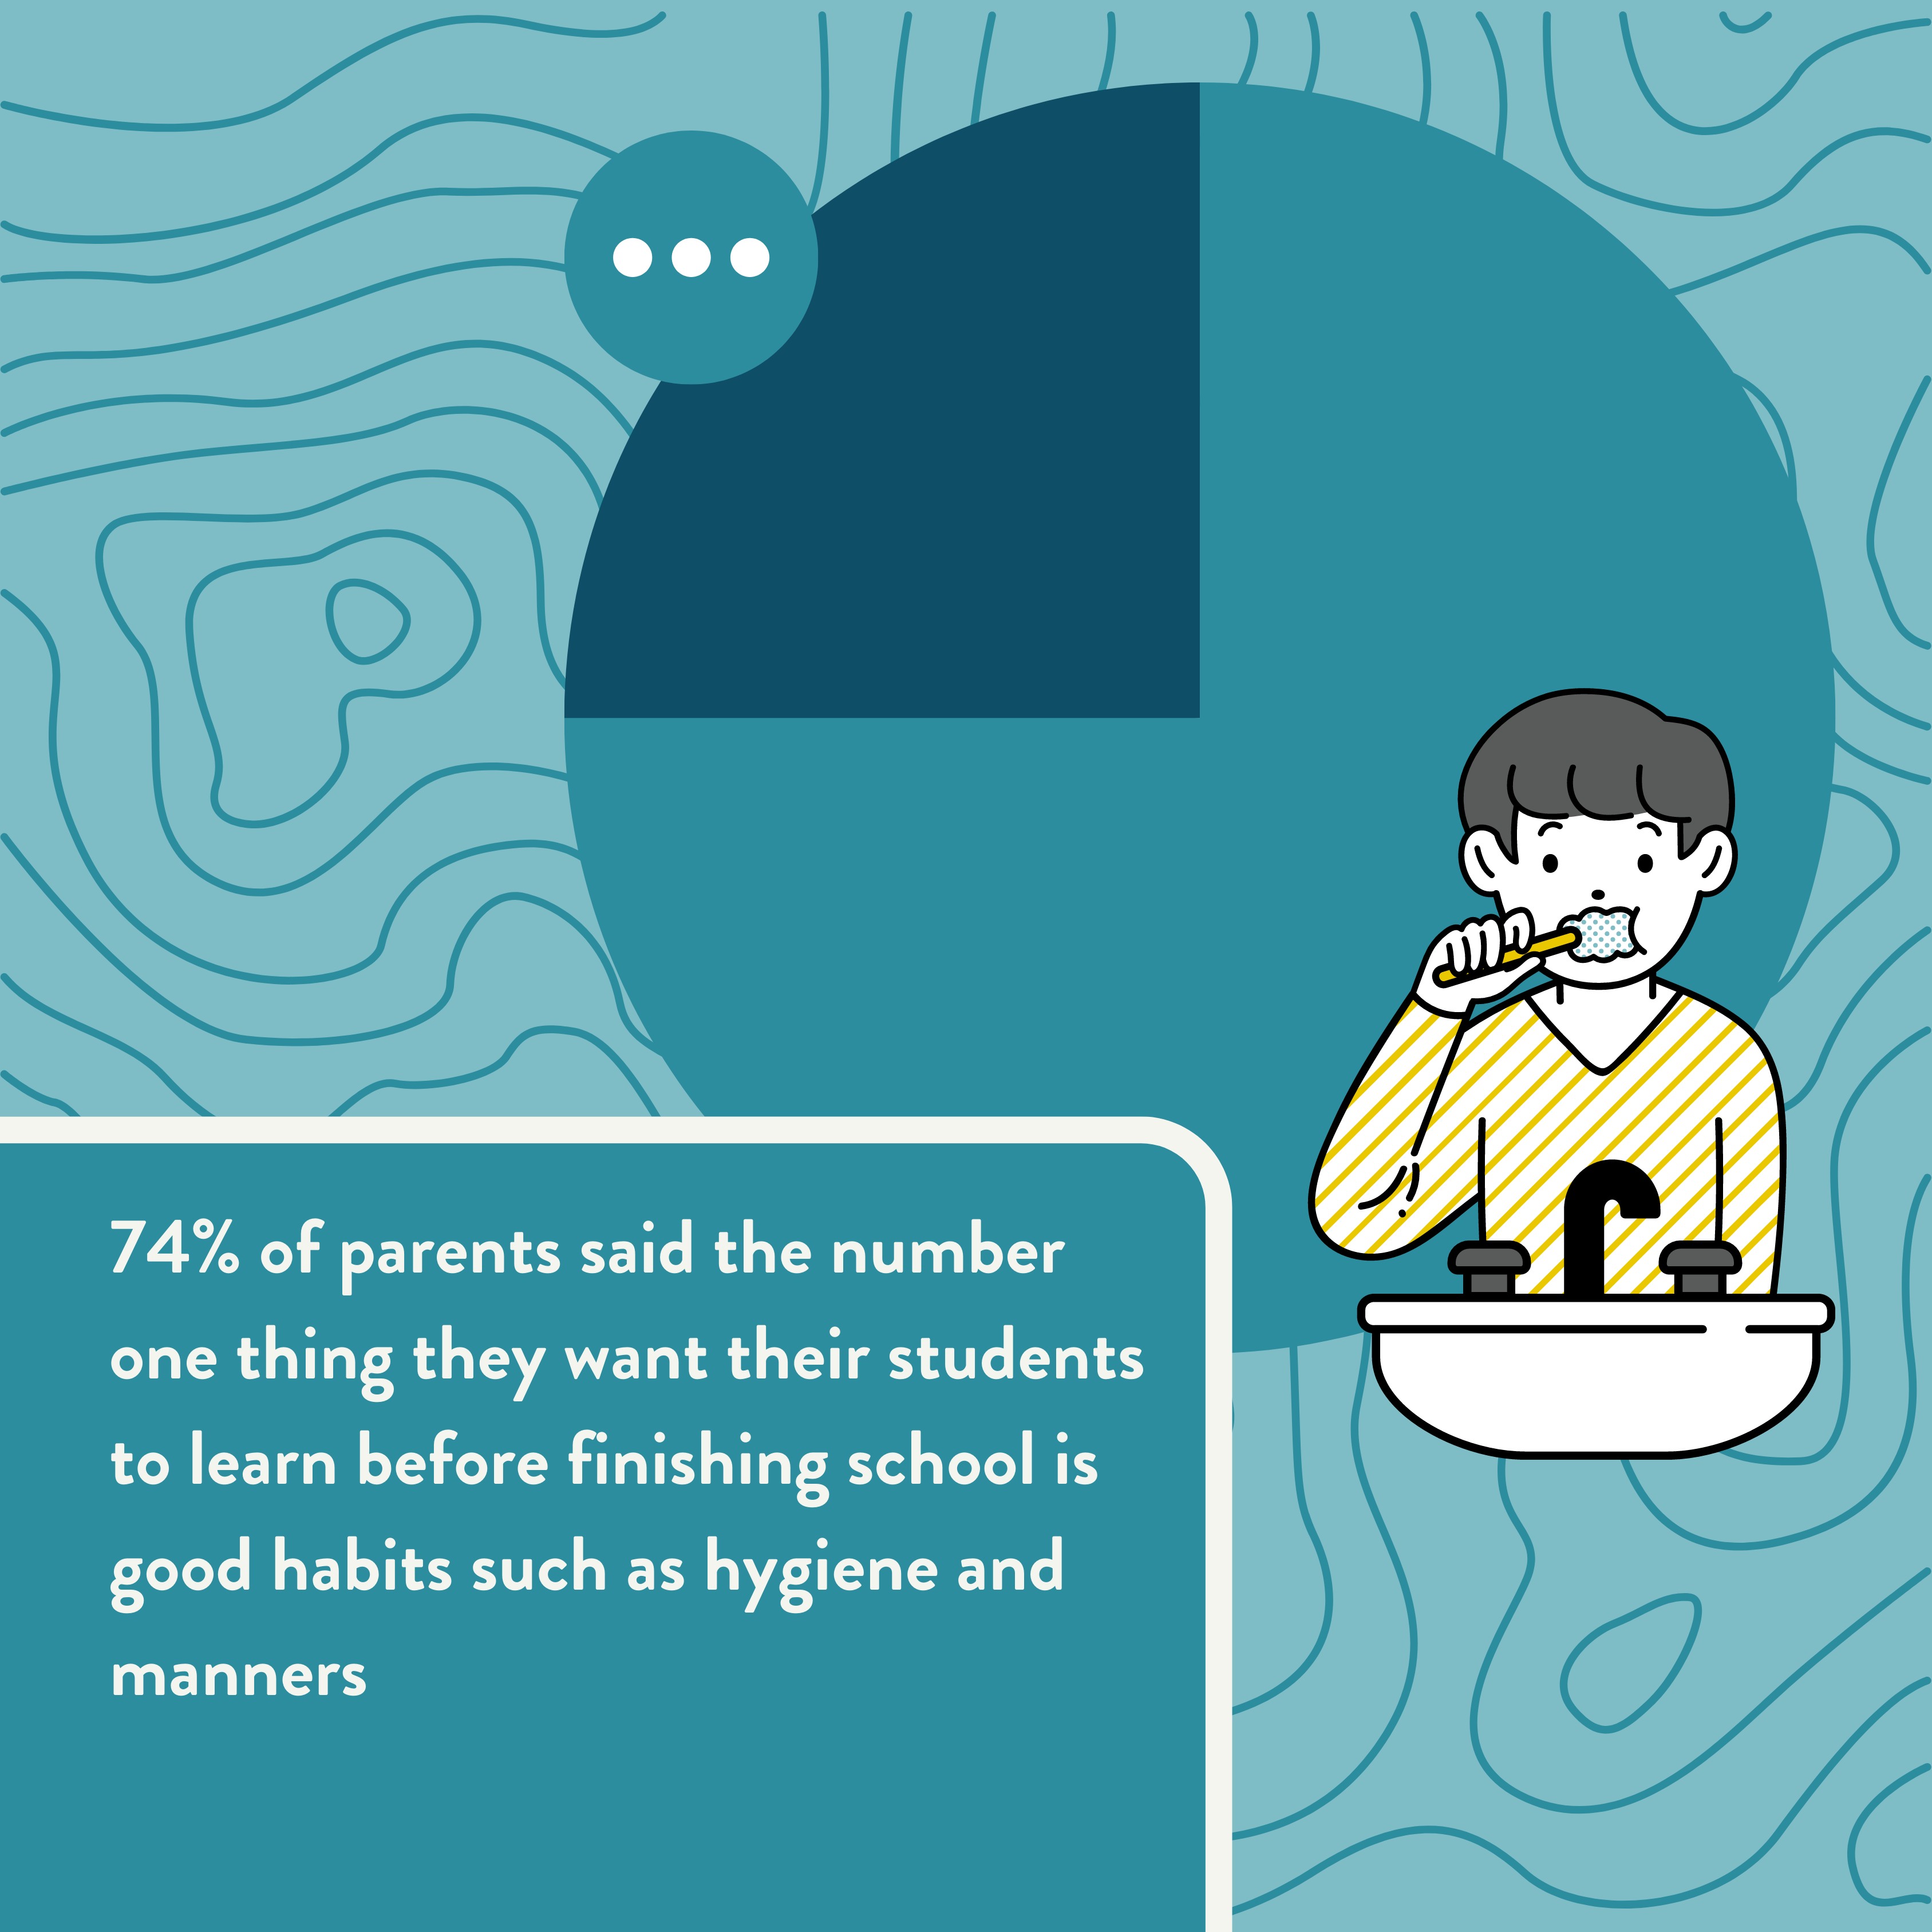 Infographic showing that 74% of parents said the number one thing they want their students to learn before finishing school is good habits such as hygiene and manners. education in rural communities